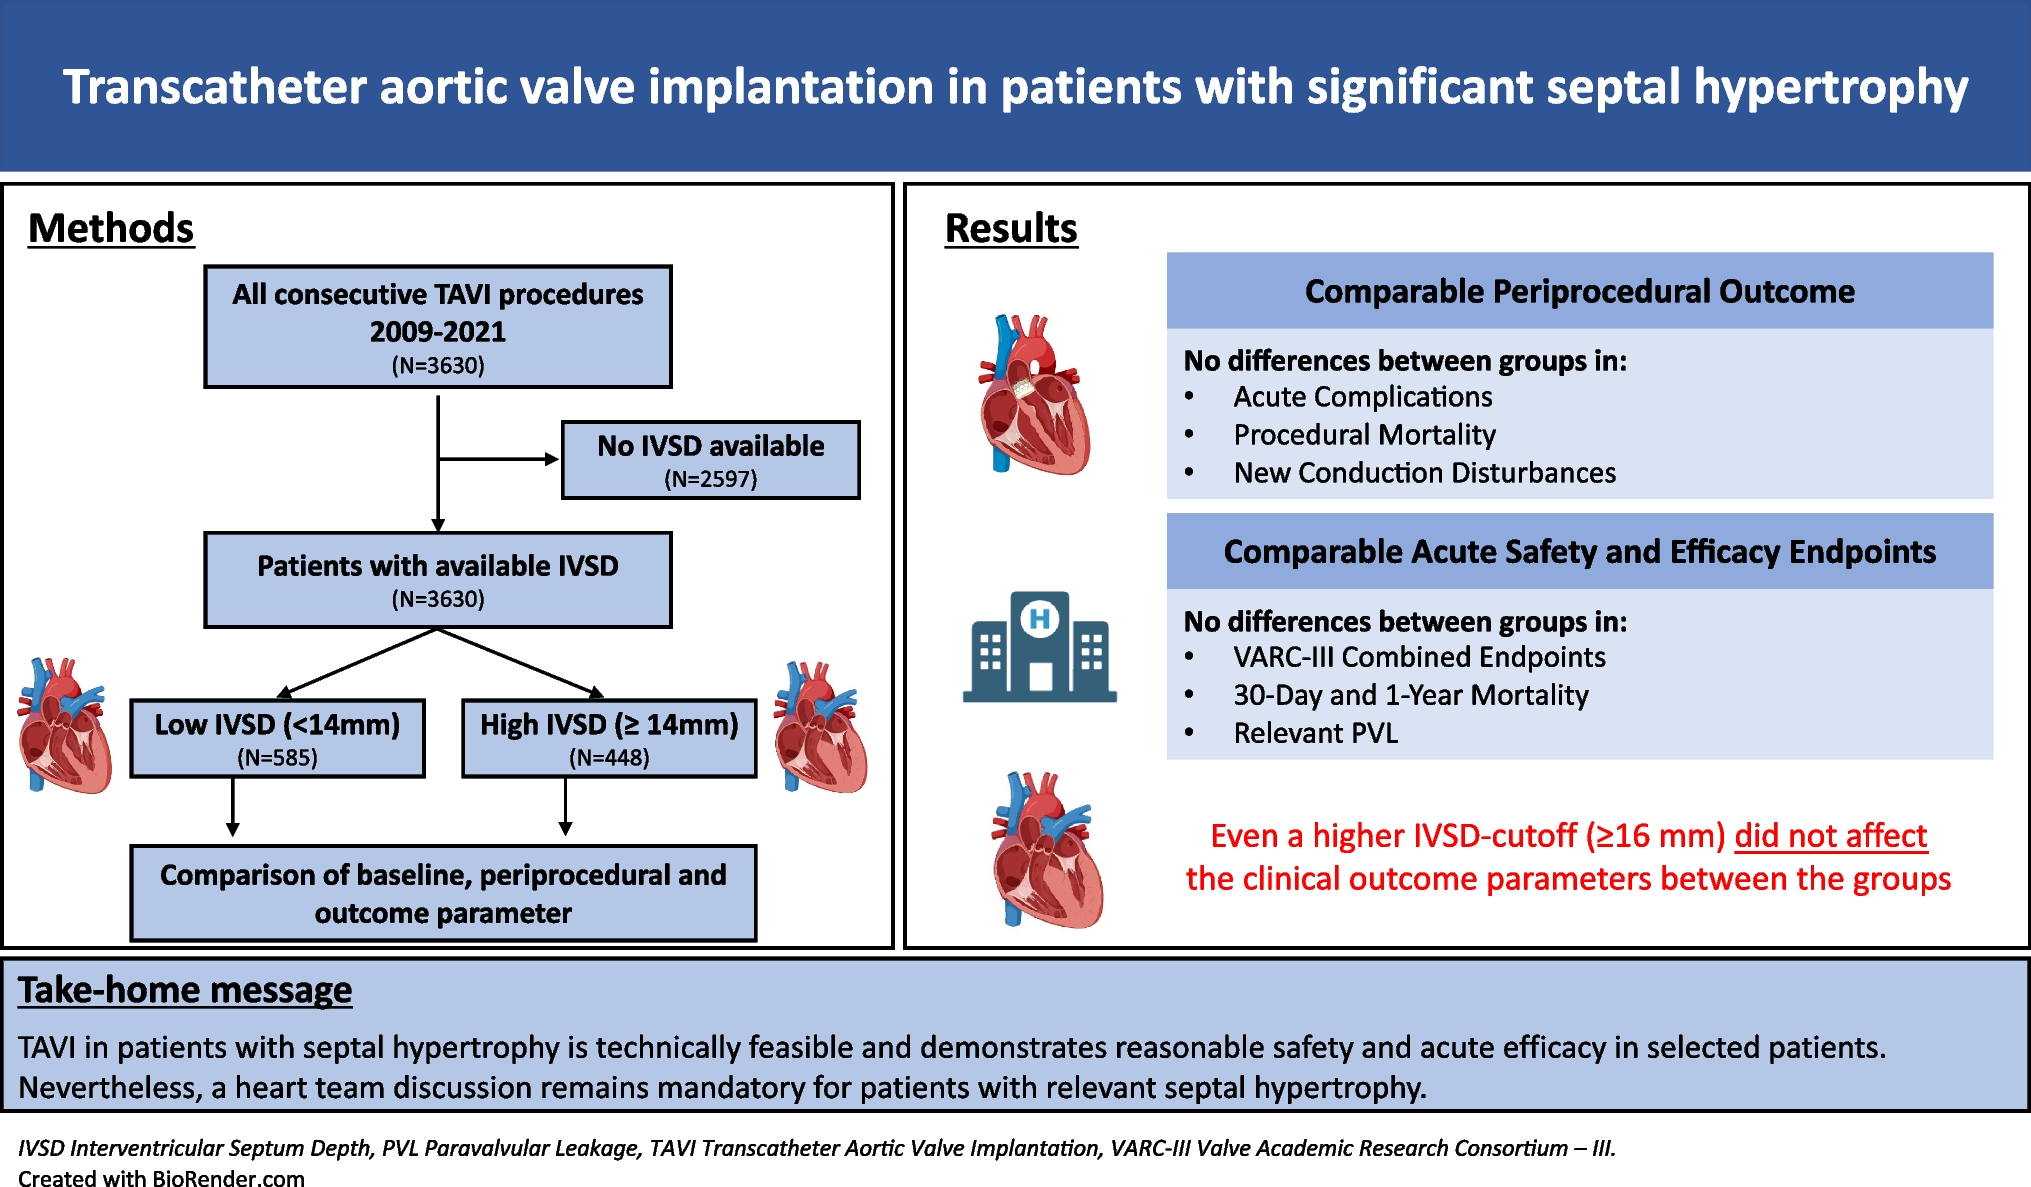 Transcatheter aortic valve implantation in patients with significant septal hypertrophy